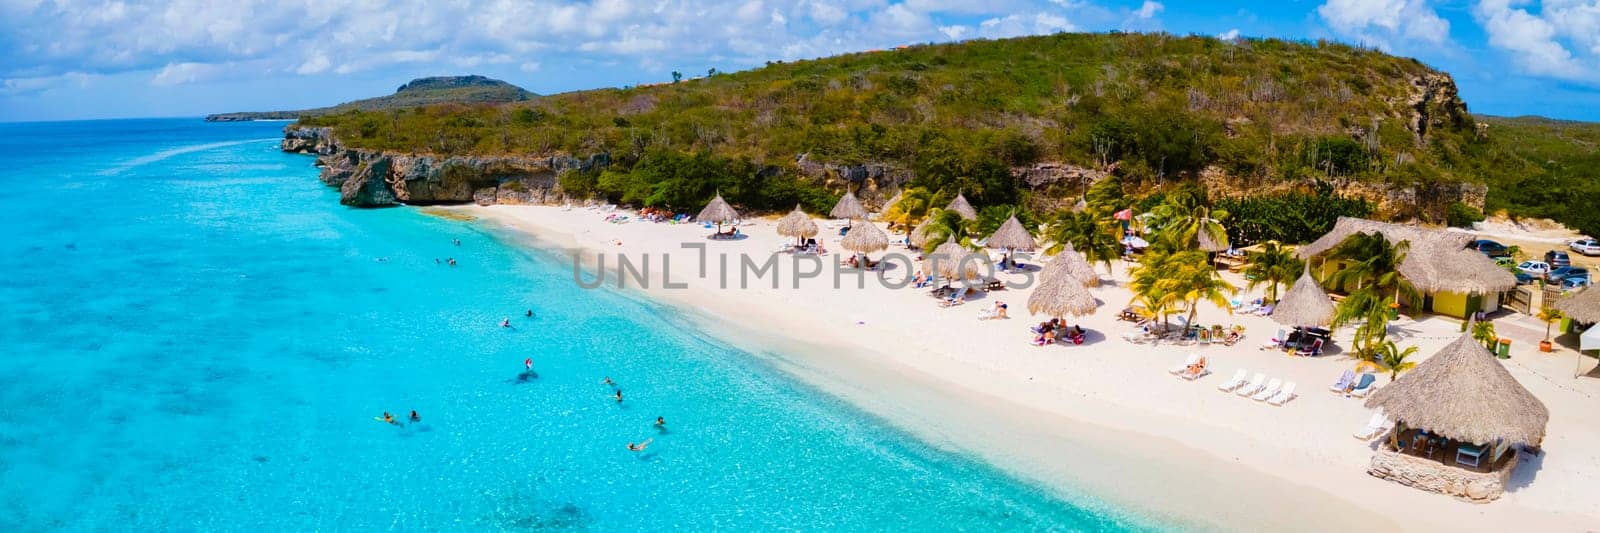 Cas Abao Beach Playa Cas Abao Caribbean island of Curacao, Playa Cas Abao in Curacao Caribbean tropical white beach with a blue turqouse colored ocean. view from above with drone at the beach